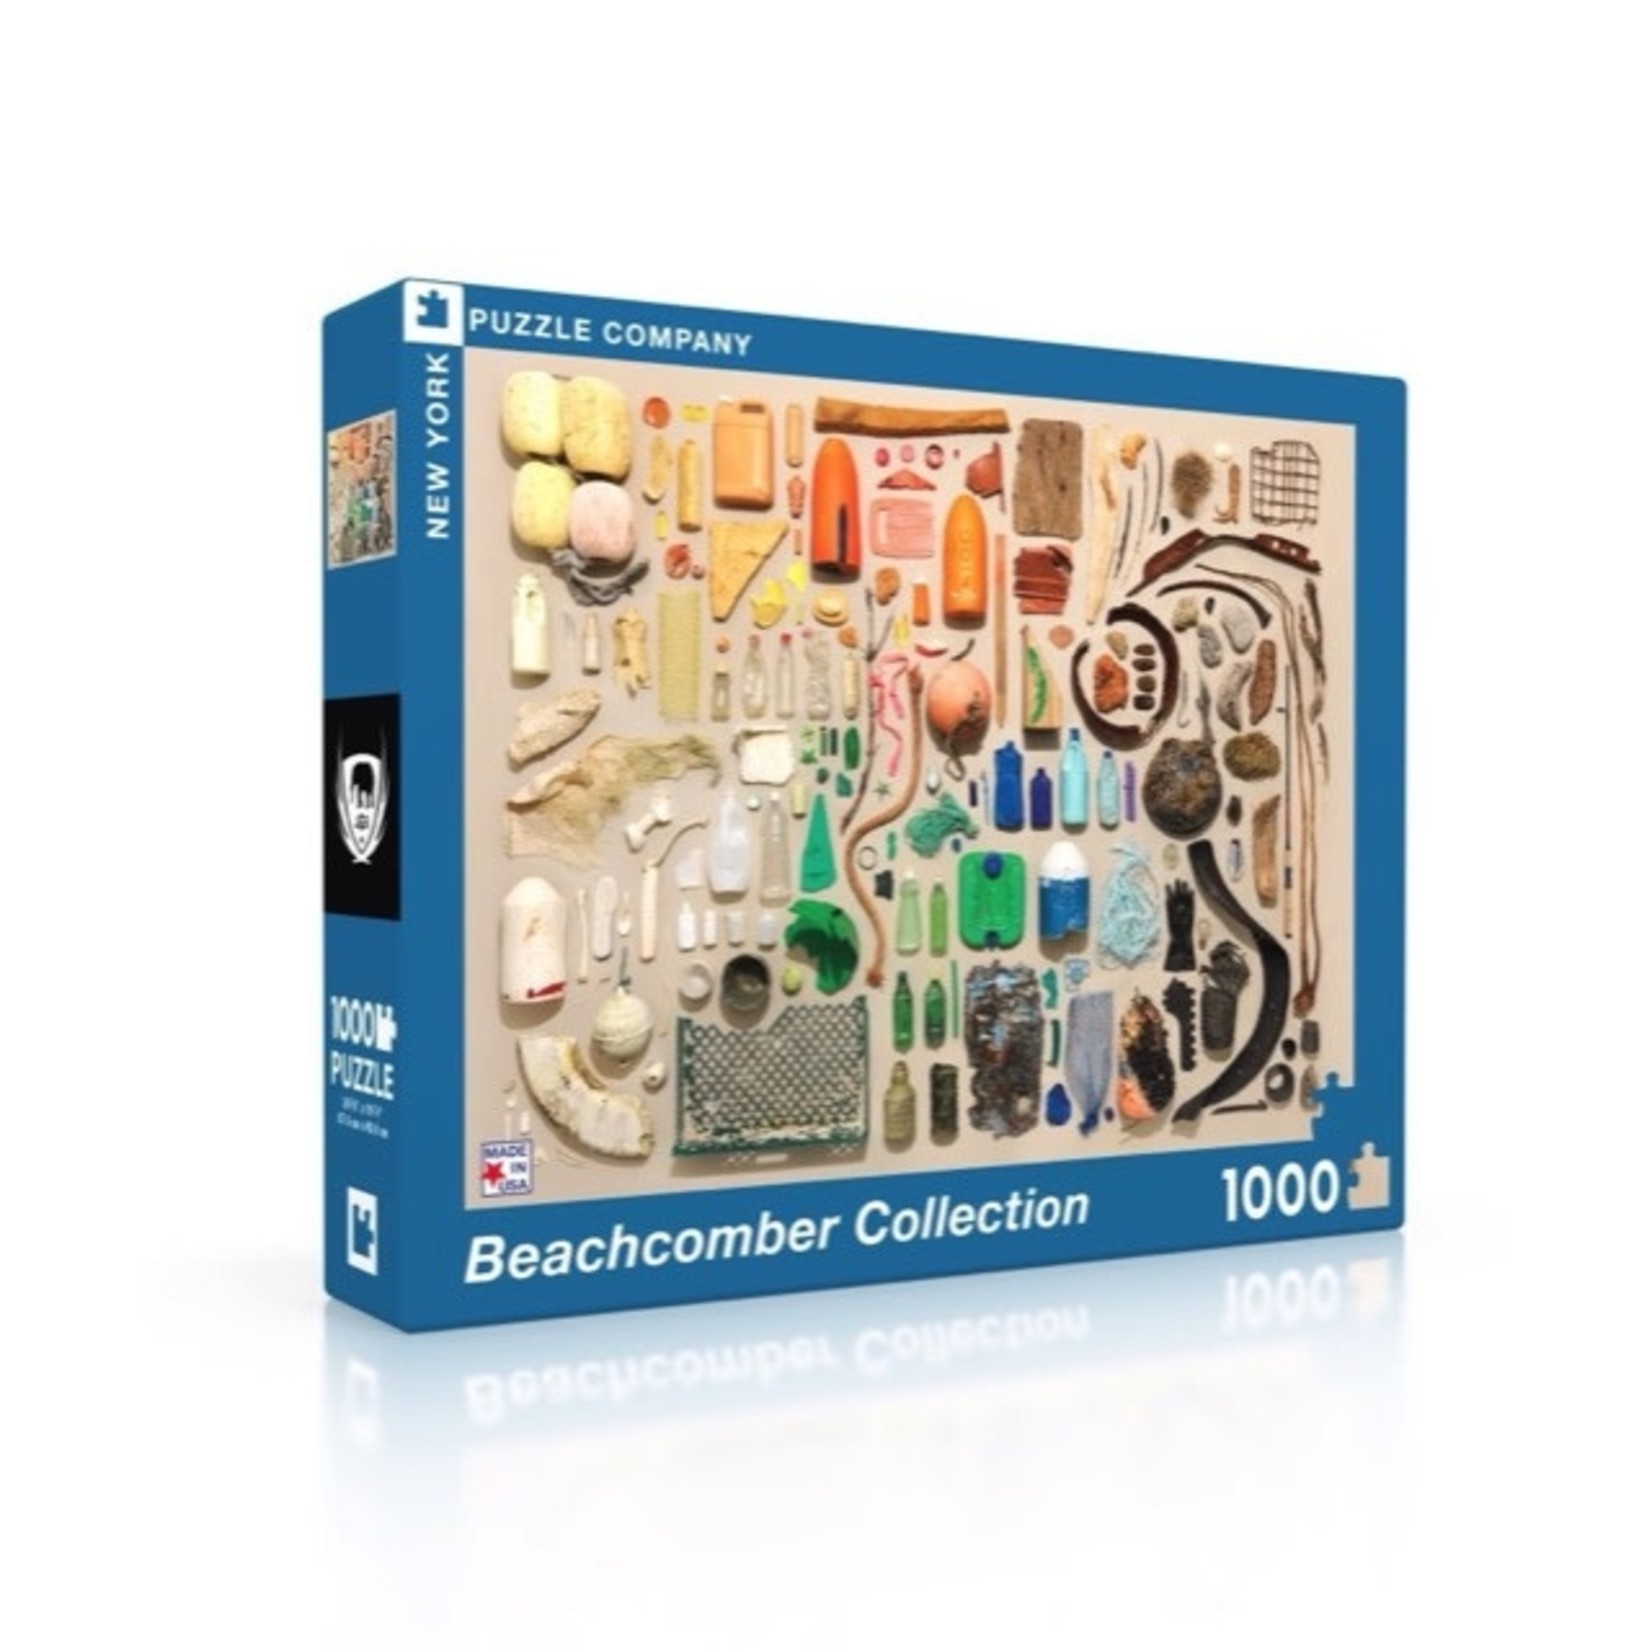 New York Puzzle Co Jim Golden: Beachcomber Collection 1000pc